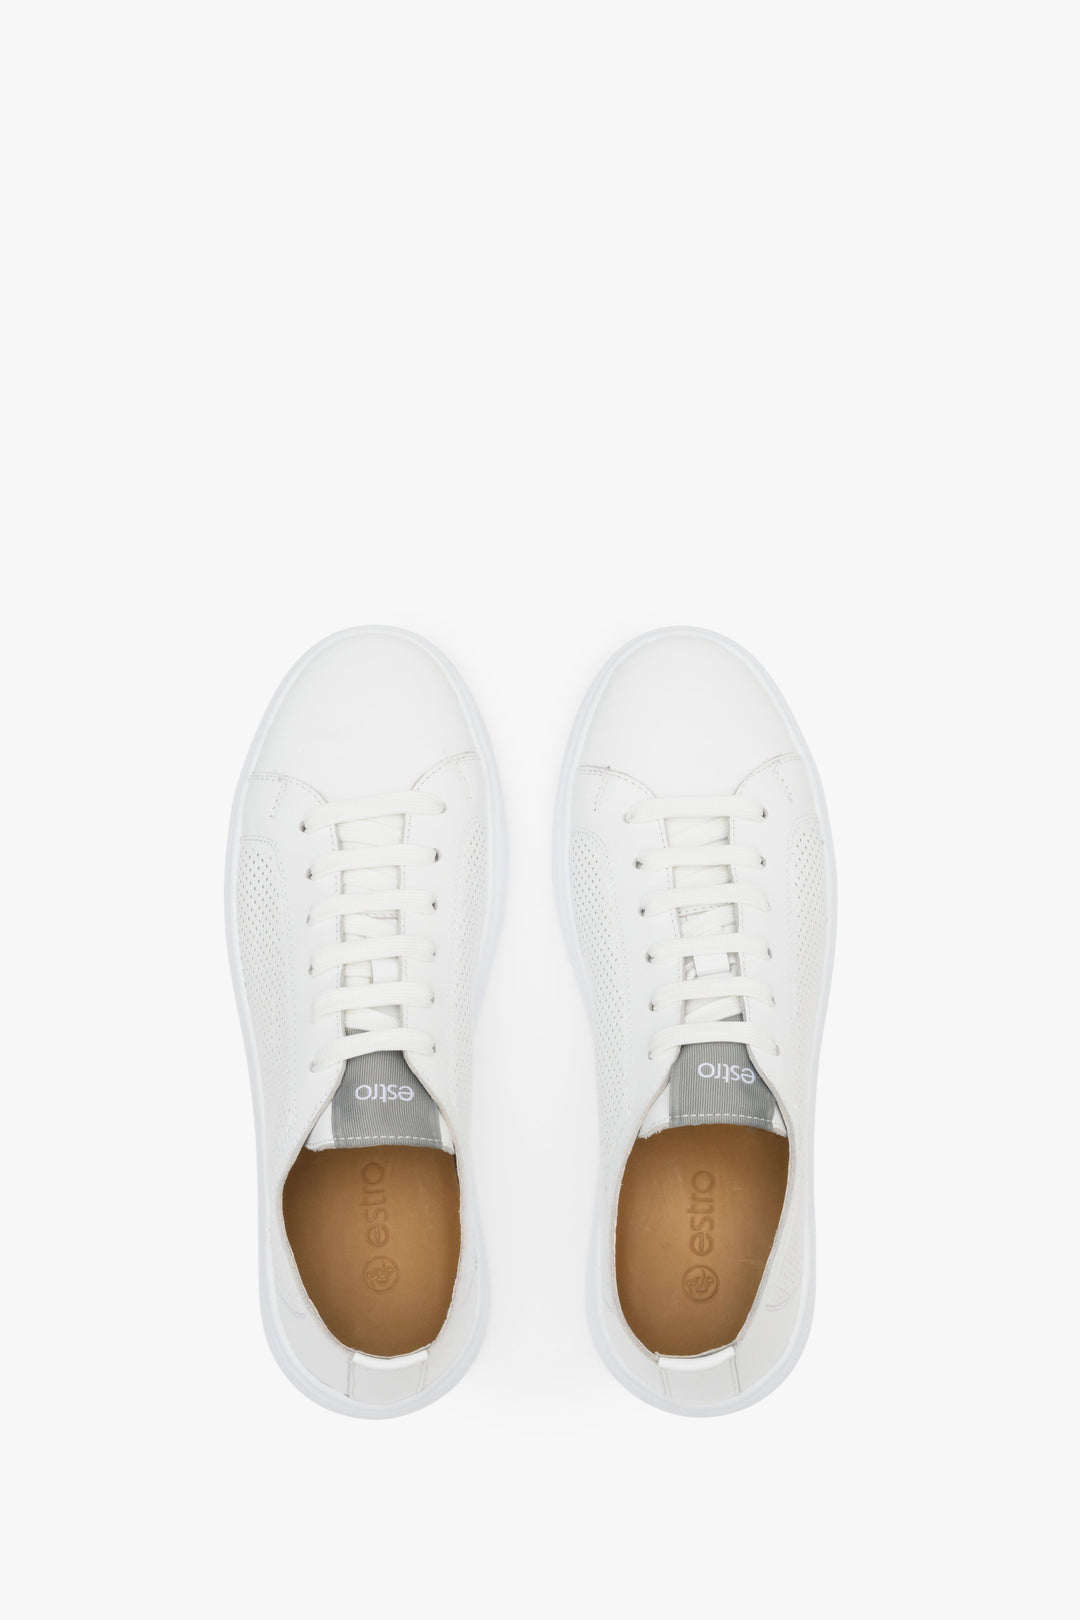 Men's white leather perforated sneakers - presentation of the footwear from above.